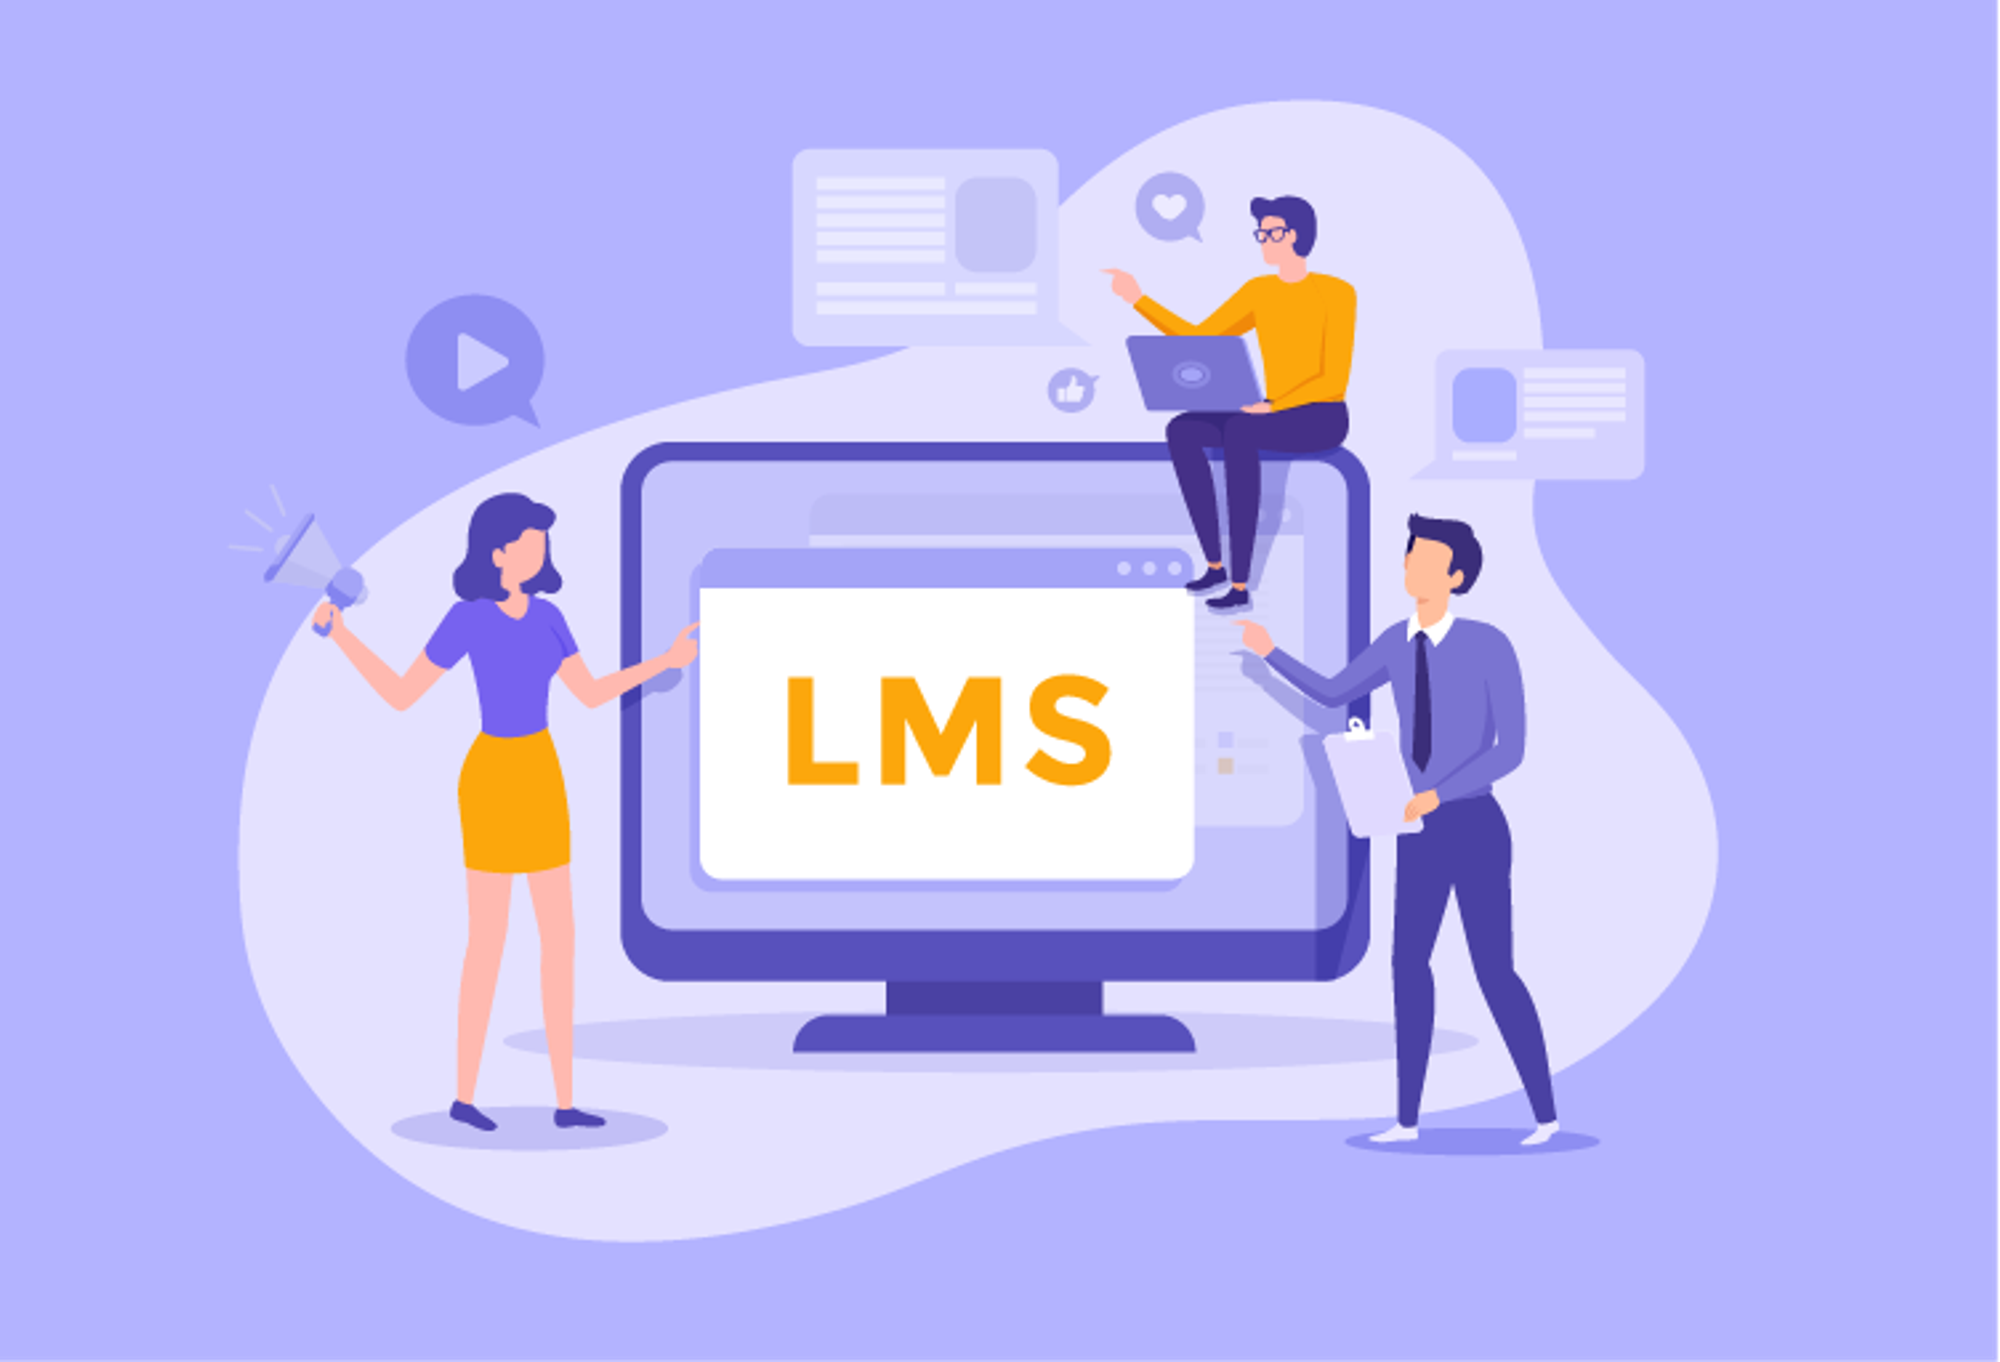                         Learning management systems (LMS)